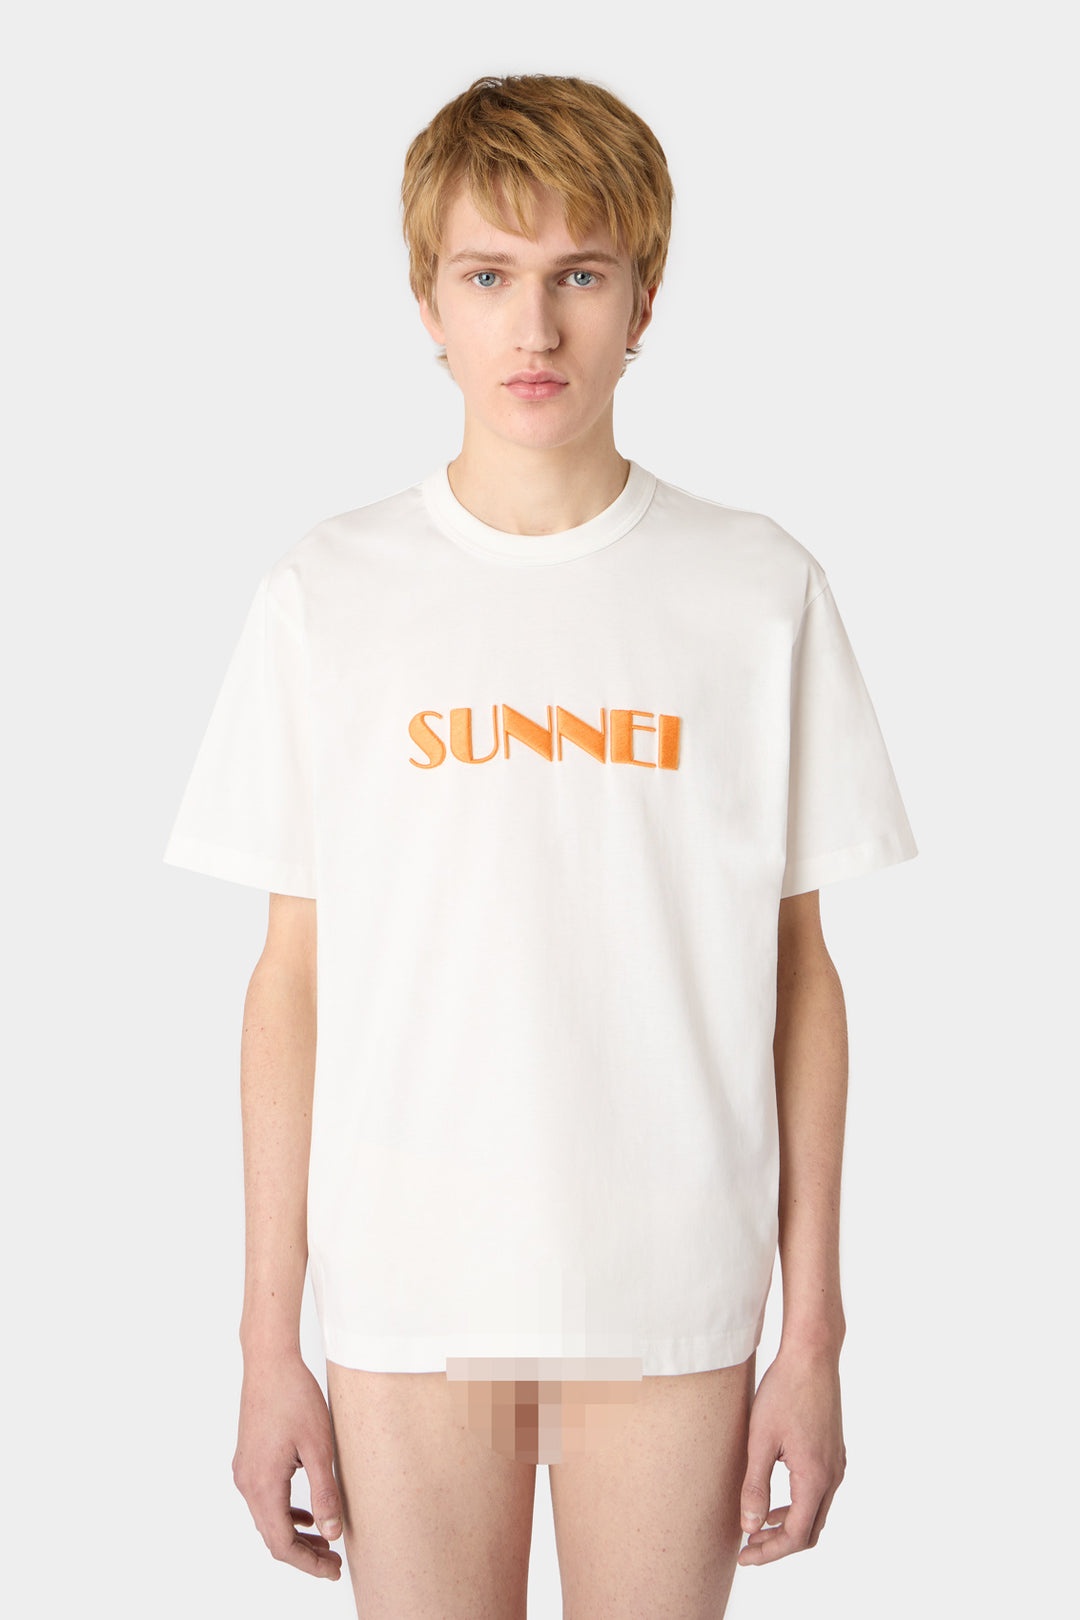 EMBROIDERED BIG LOGO T-SHIRT / off-white & peach - 2